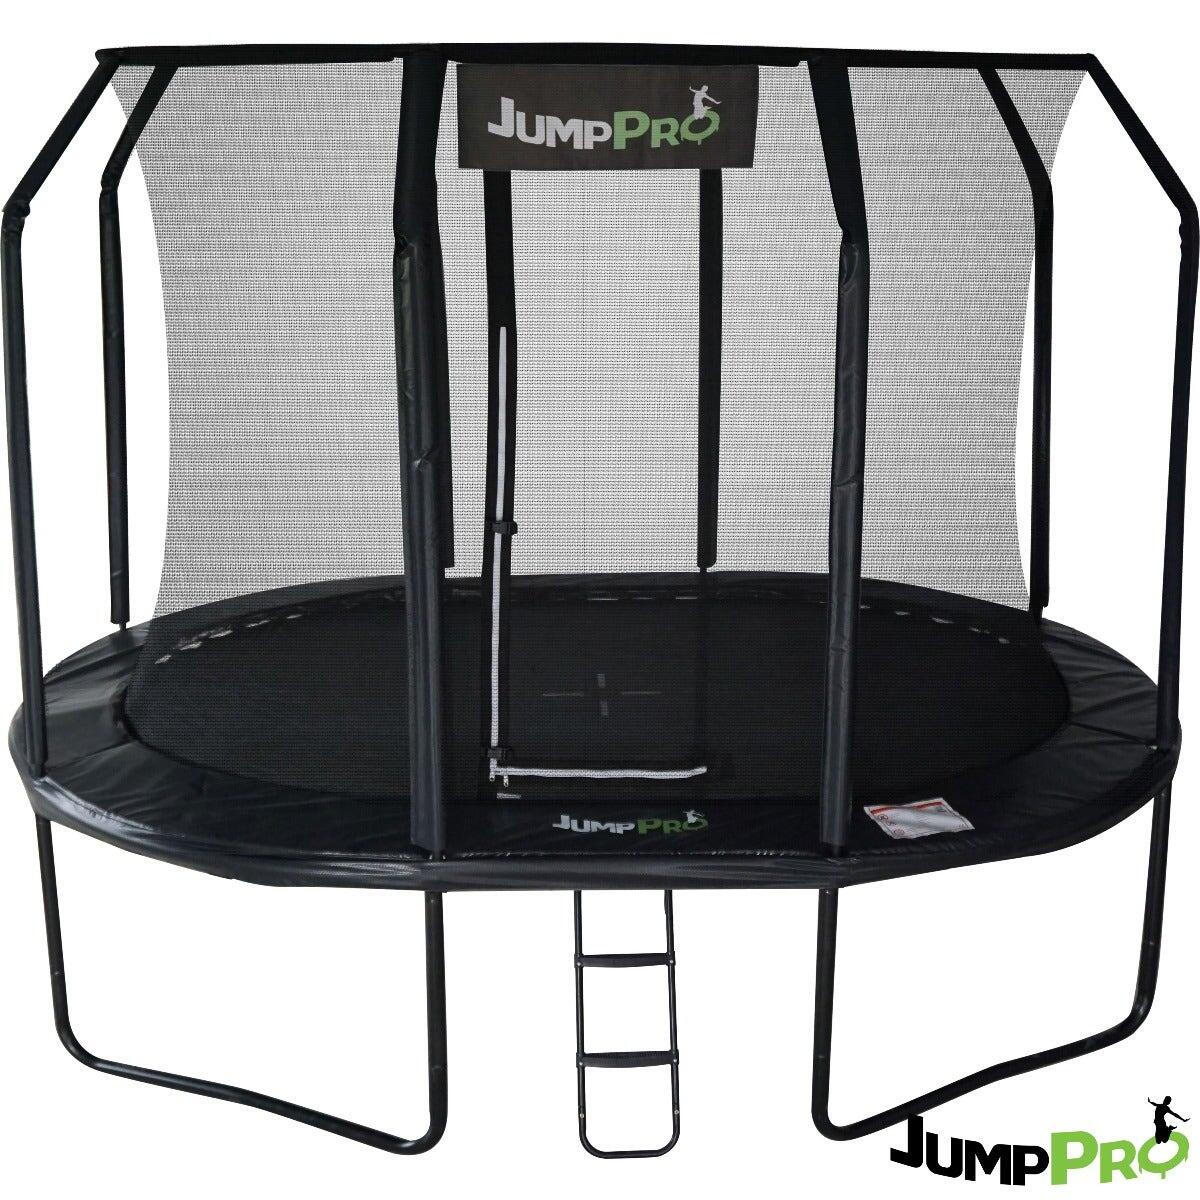 JUMPPRO 10ft x 7ft JumpPRO™ Xcel Black Oval Trampoline with Enclosure